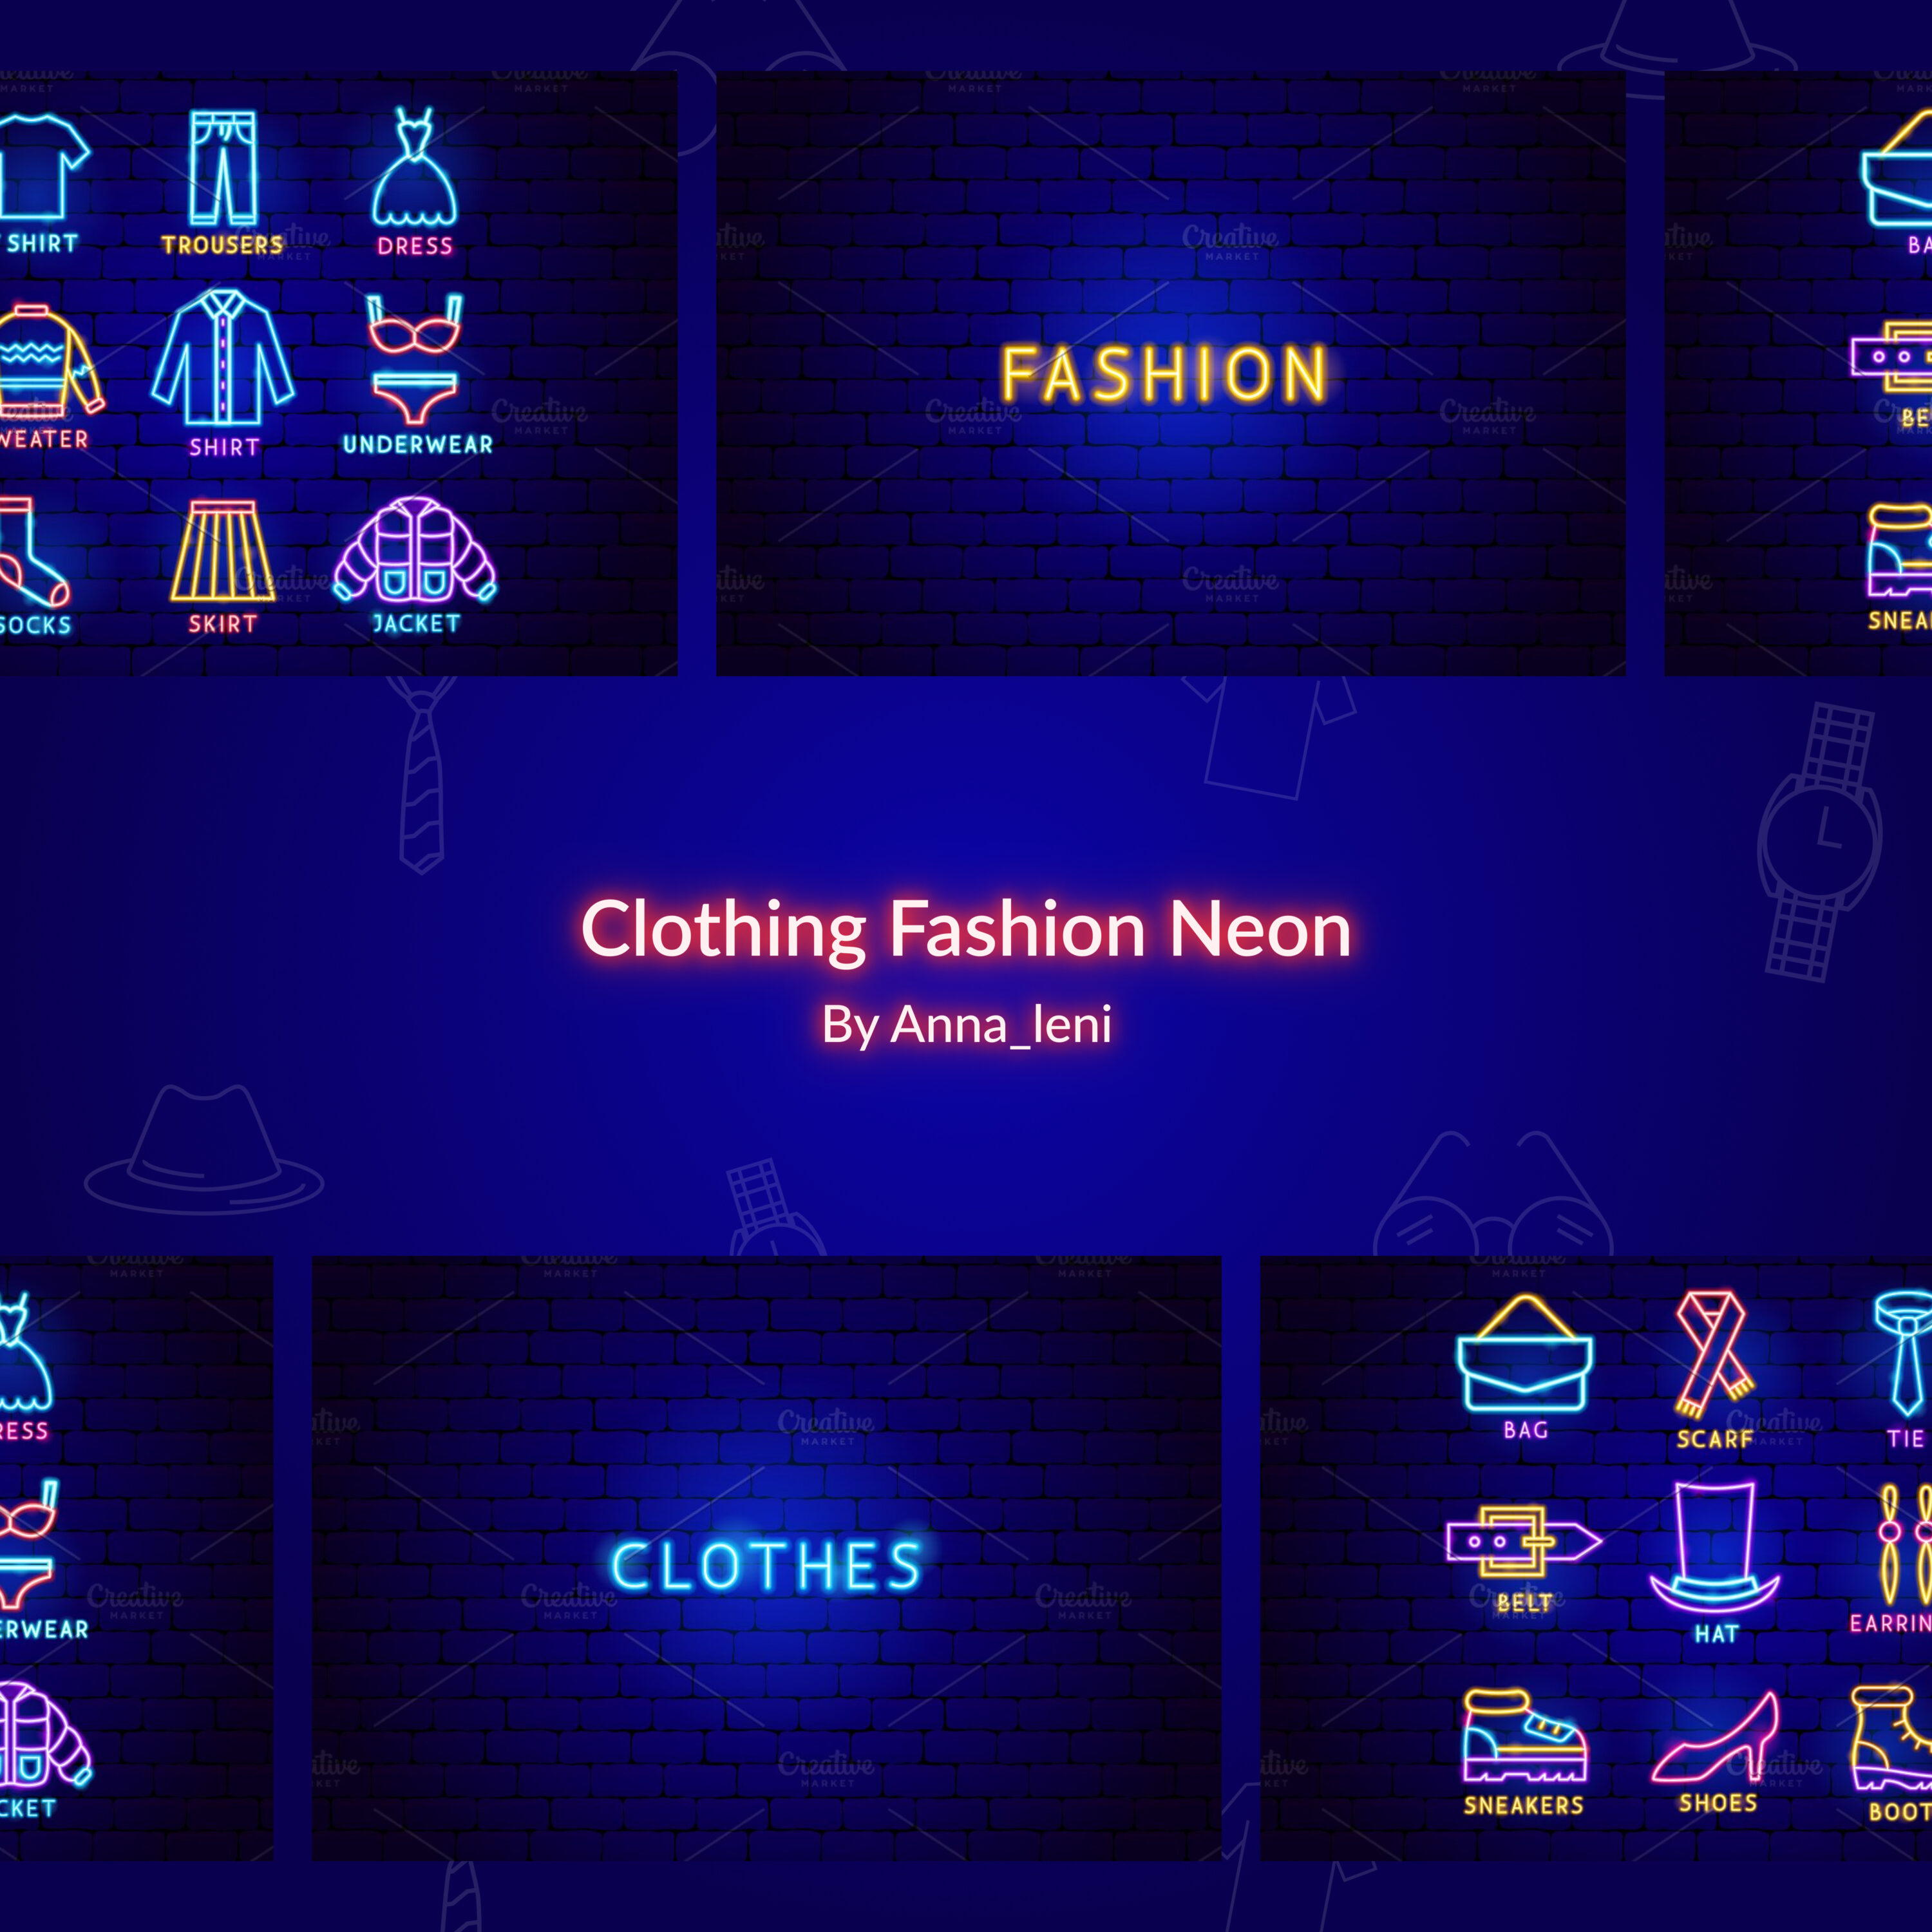 Clothing fashion neon preview.